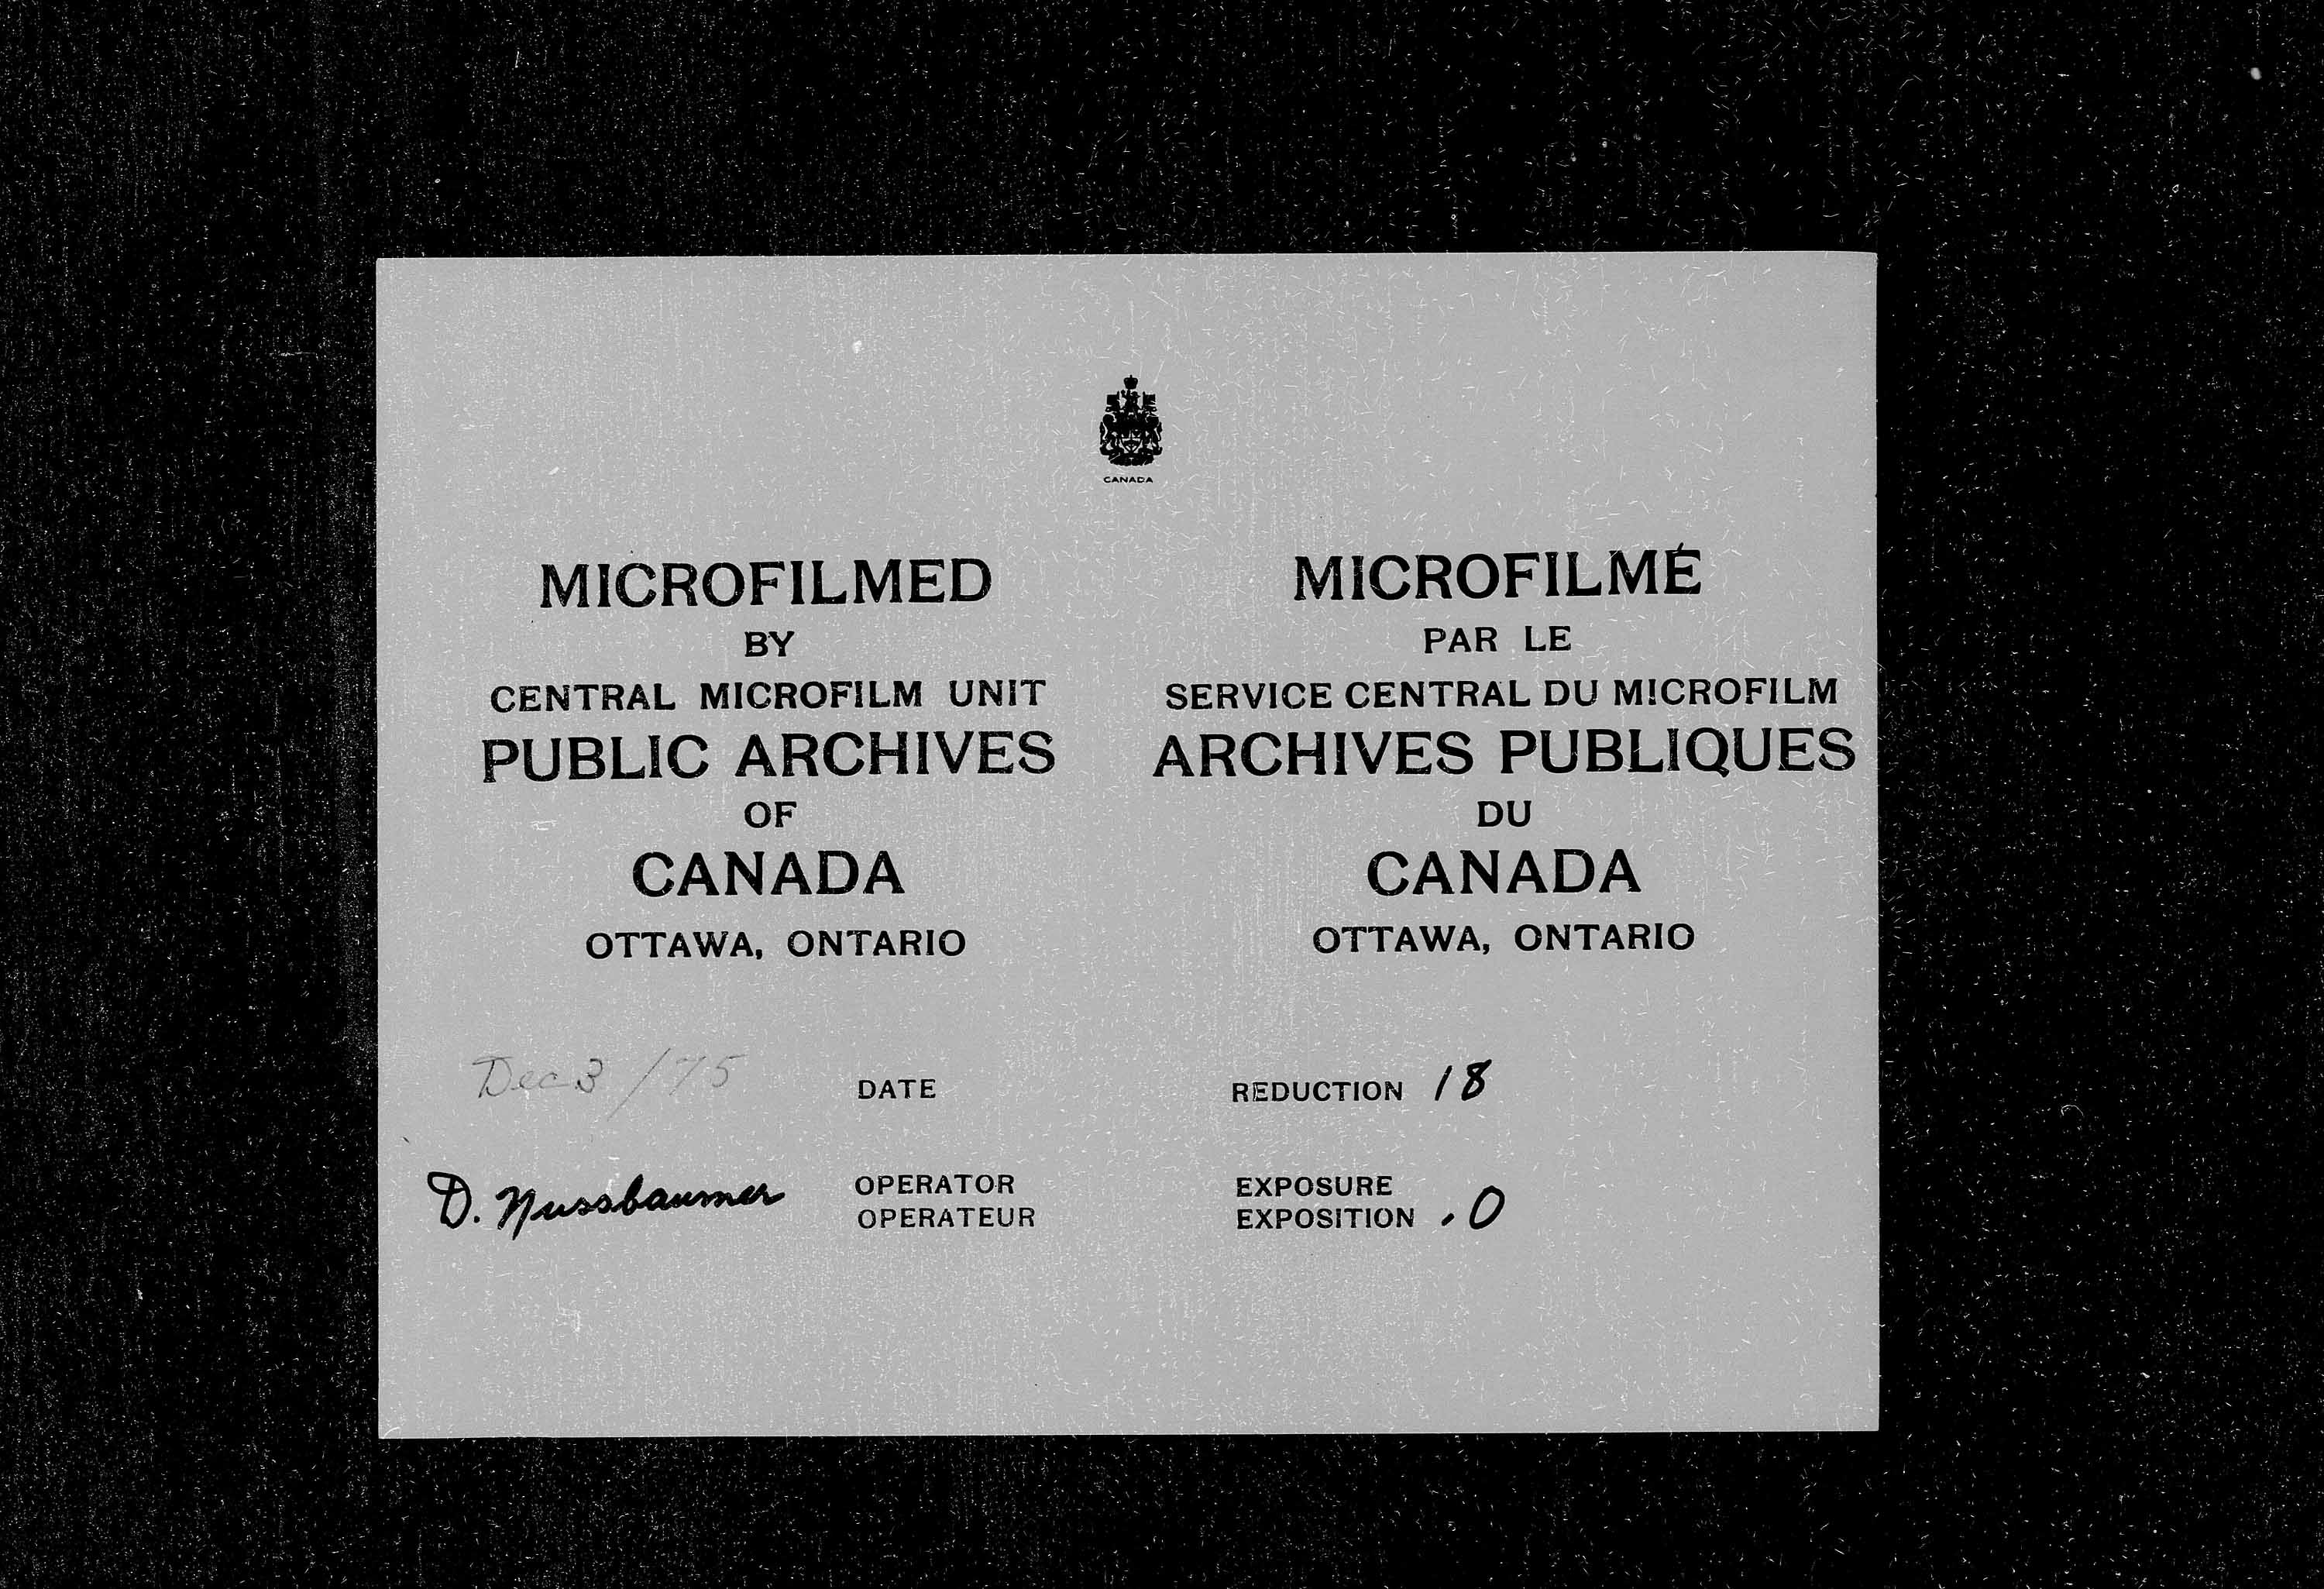 Title: Census of Canada, 1871 - Mikan Number: 142105 - Microform: c-9973